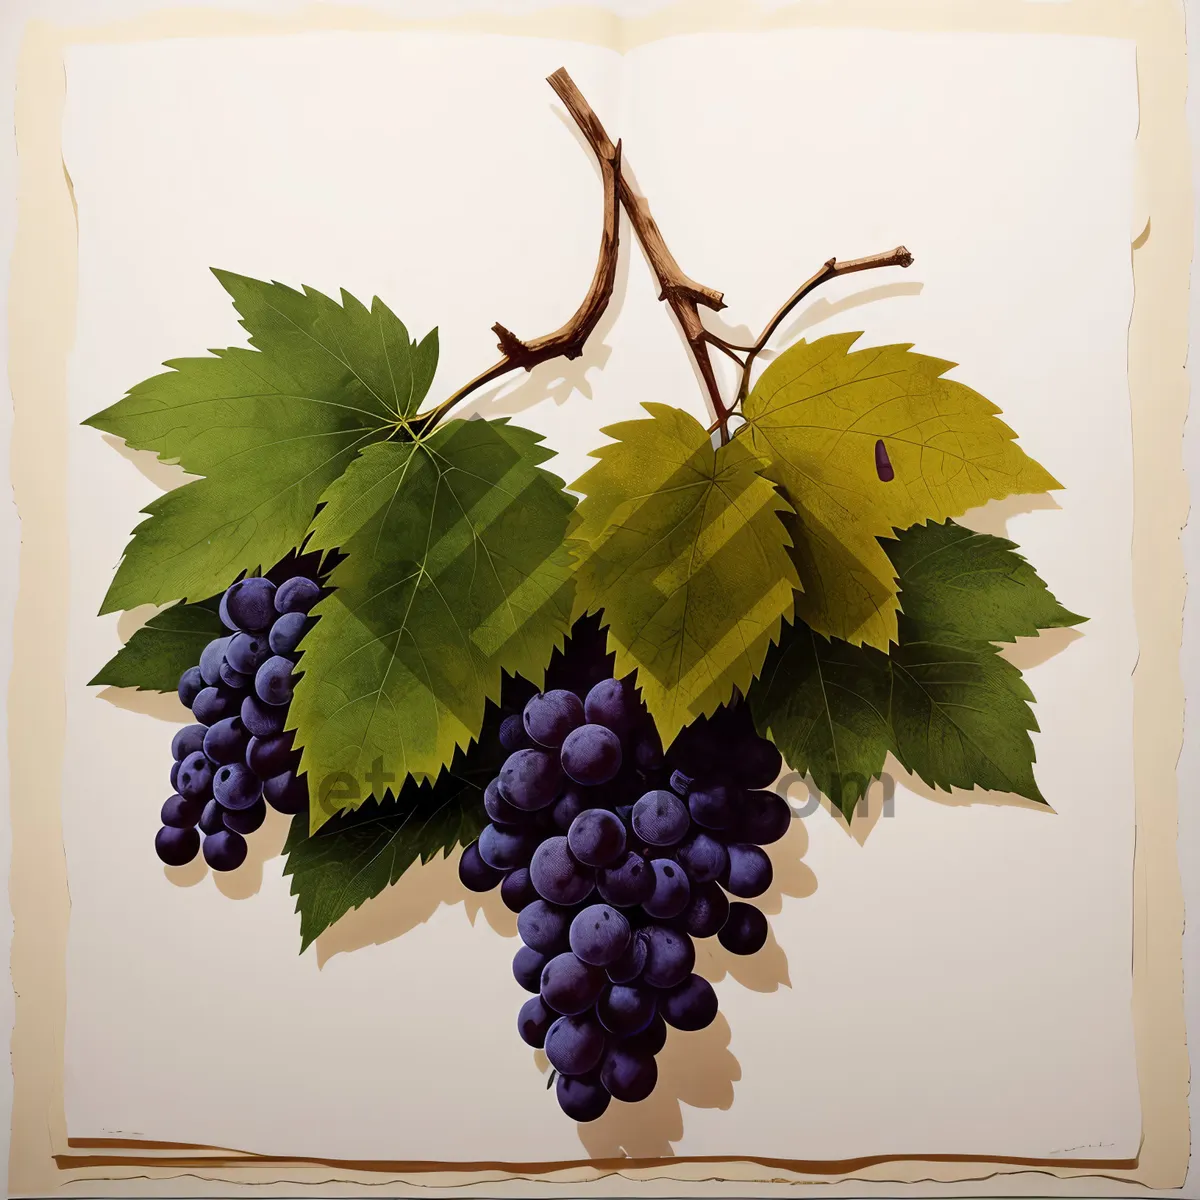 Picture of Autumn Harvest: Ripe, Juicy Grapes on Vine